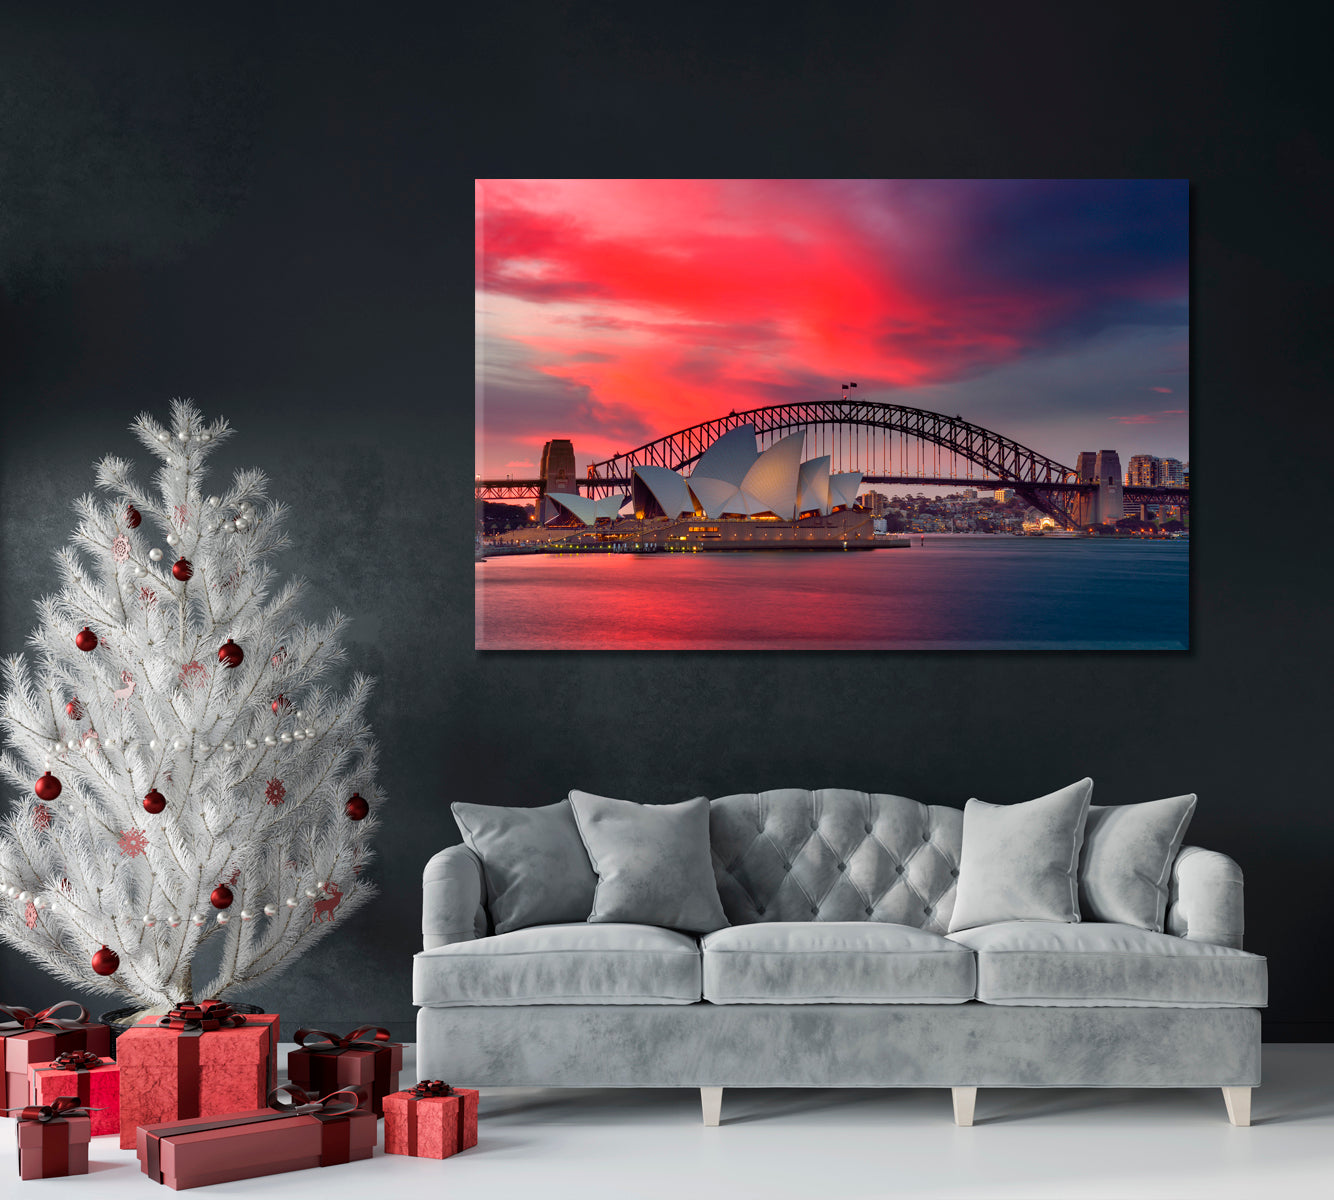 Sydney Opera House and Harbour Bridge at Sunset Canvas Print ArtLexy 1 Panel 24"x16" inches 